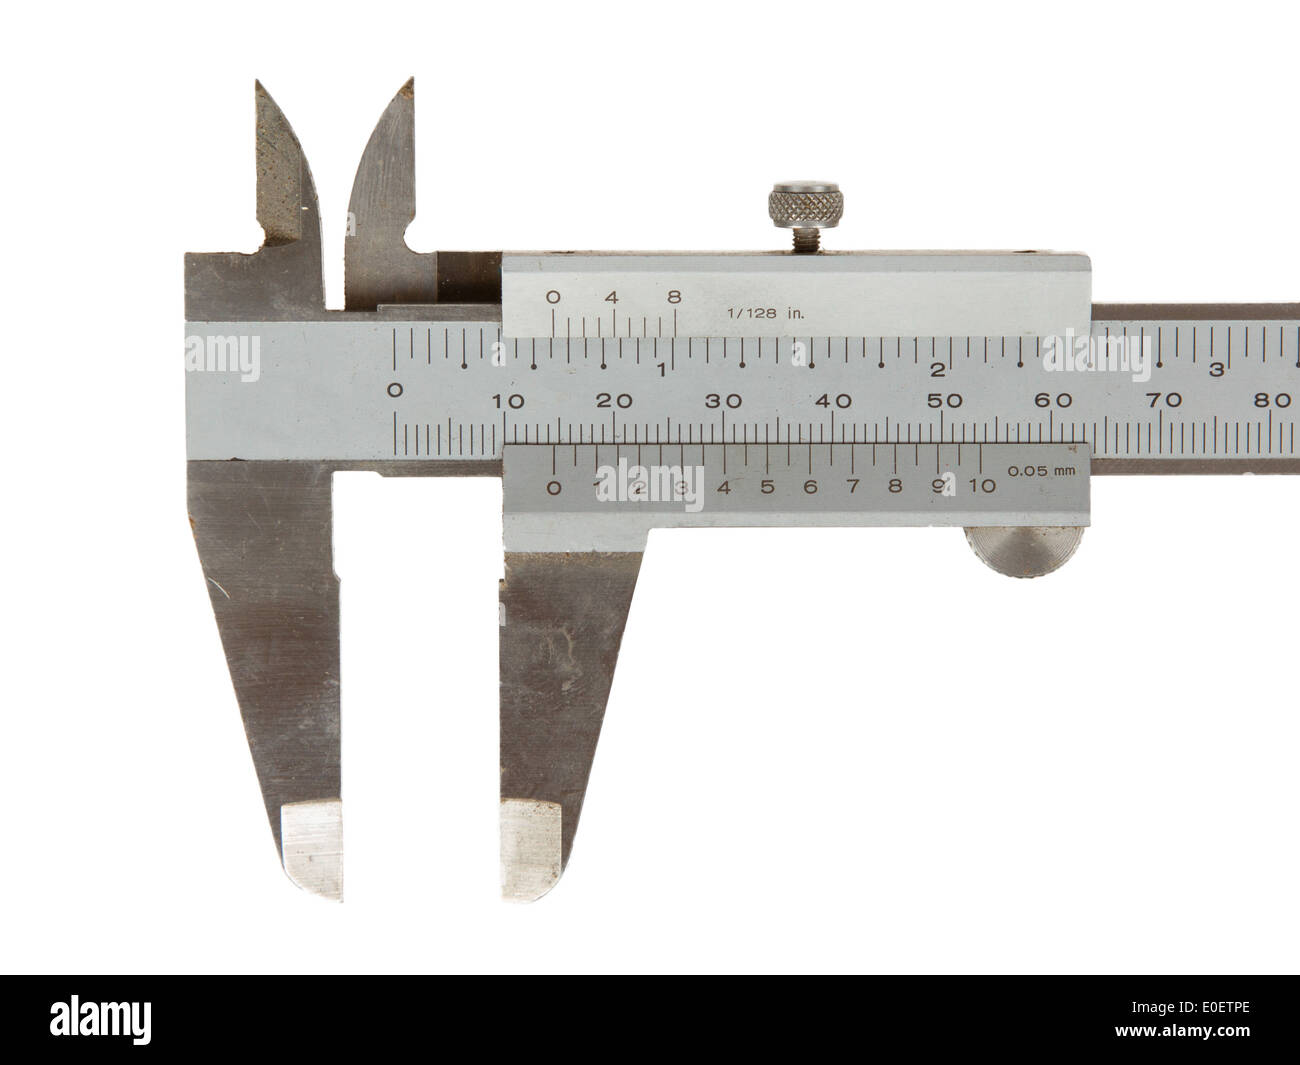 Old used caliper (an instrument for measuring) isolated on white Stock Photo